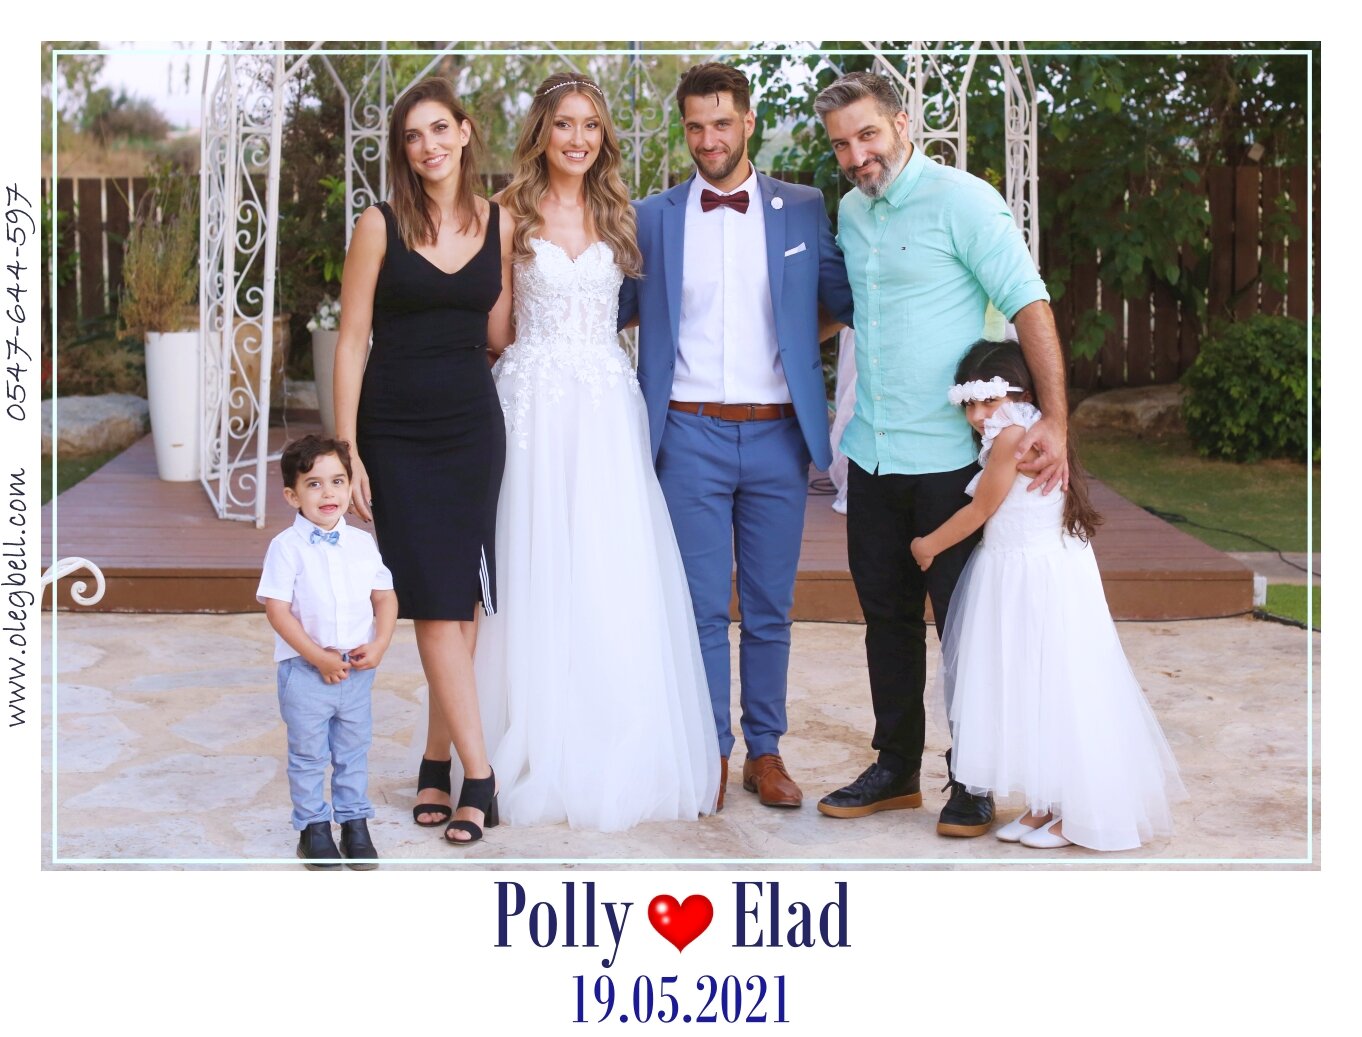 POLLY_AND_ELAD_WD_MG_SITE_007.JPG